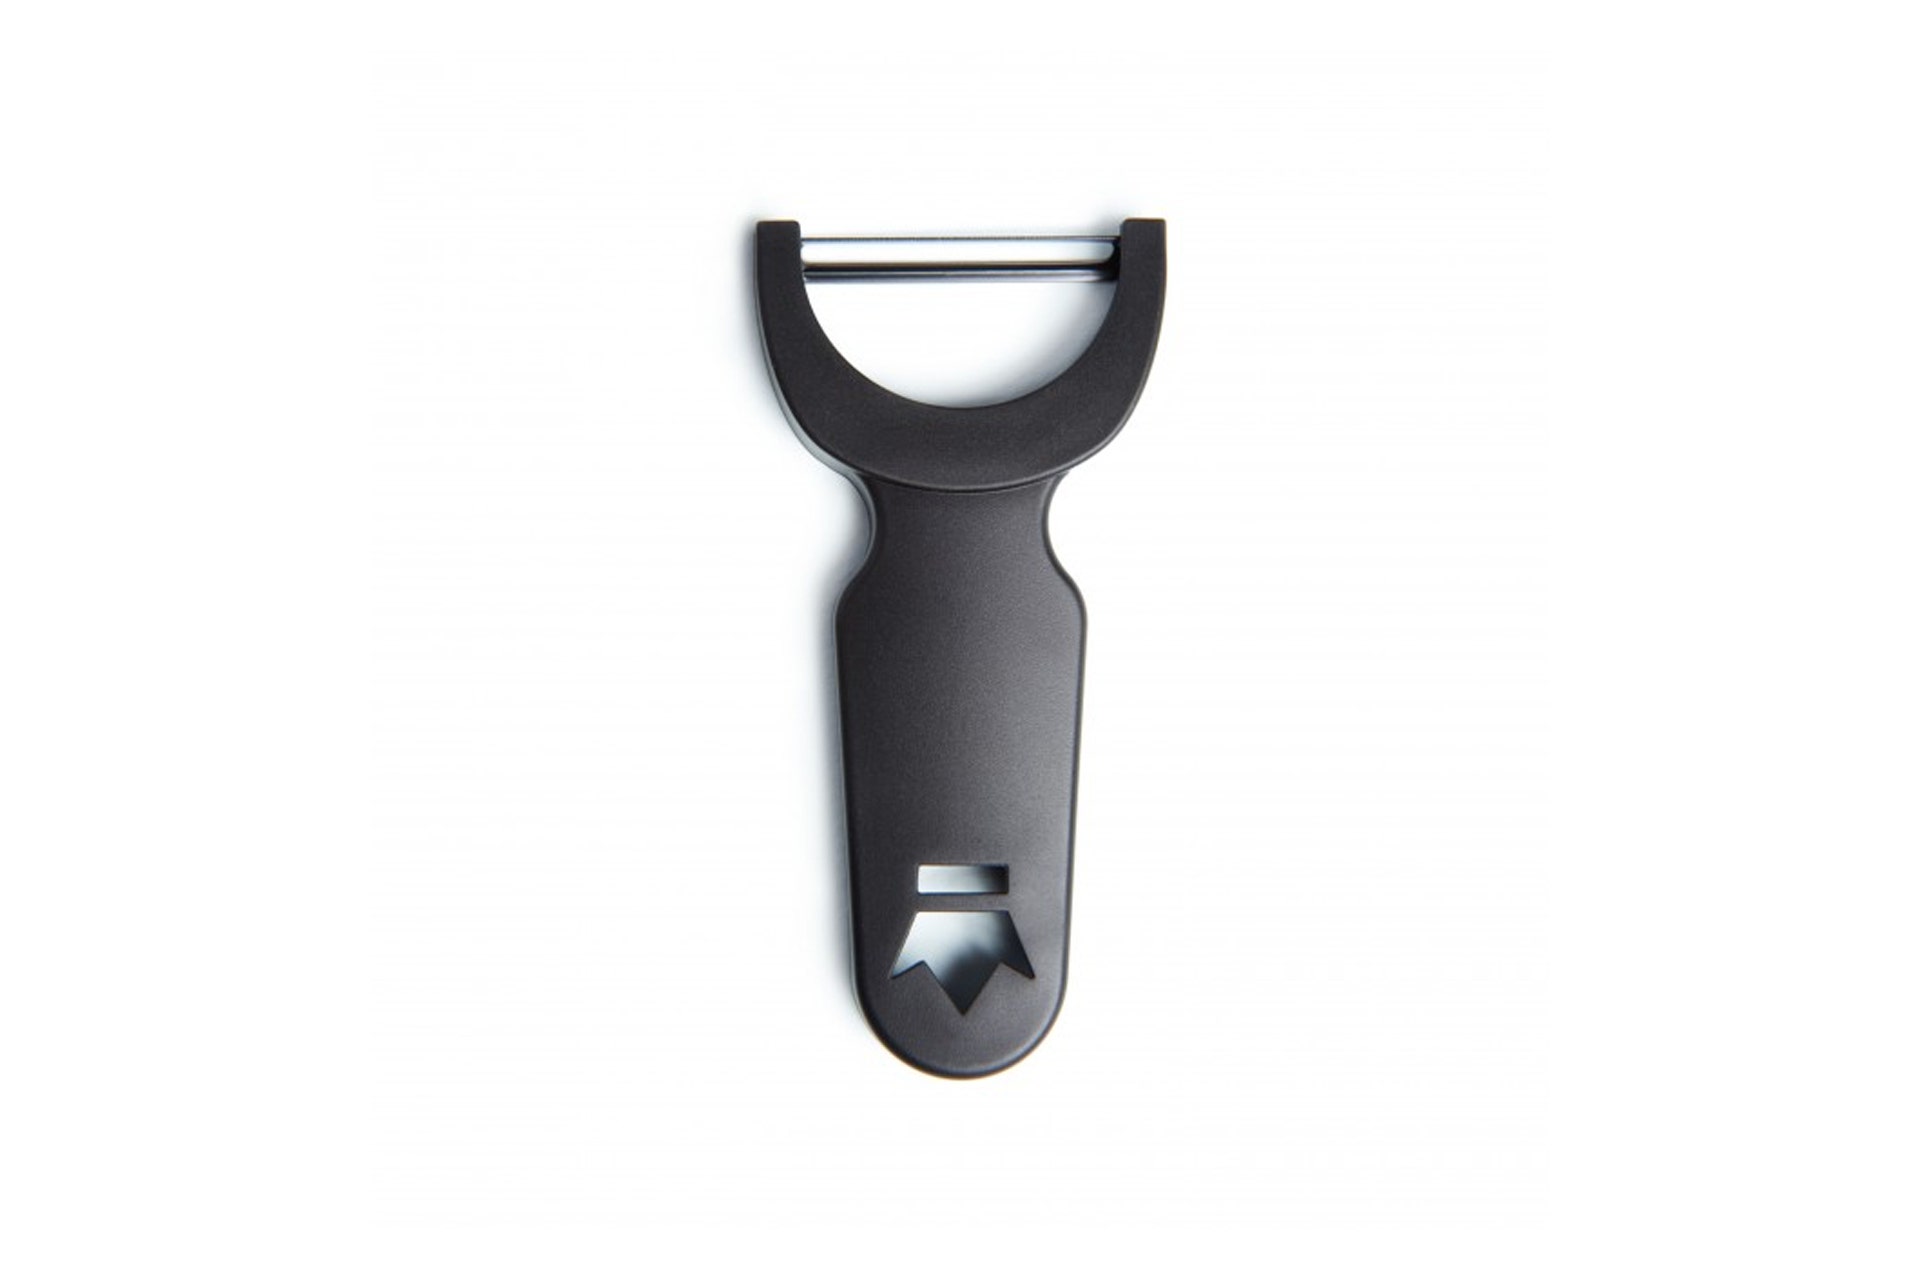 Cocktail Kingdom citrus peeler is one of the best peelers for cocktails